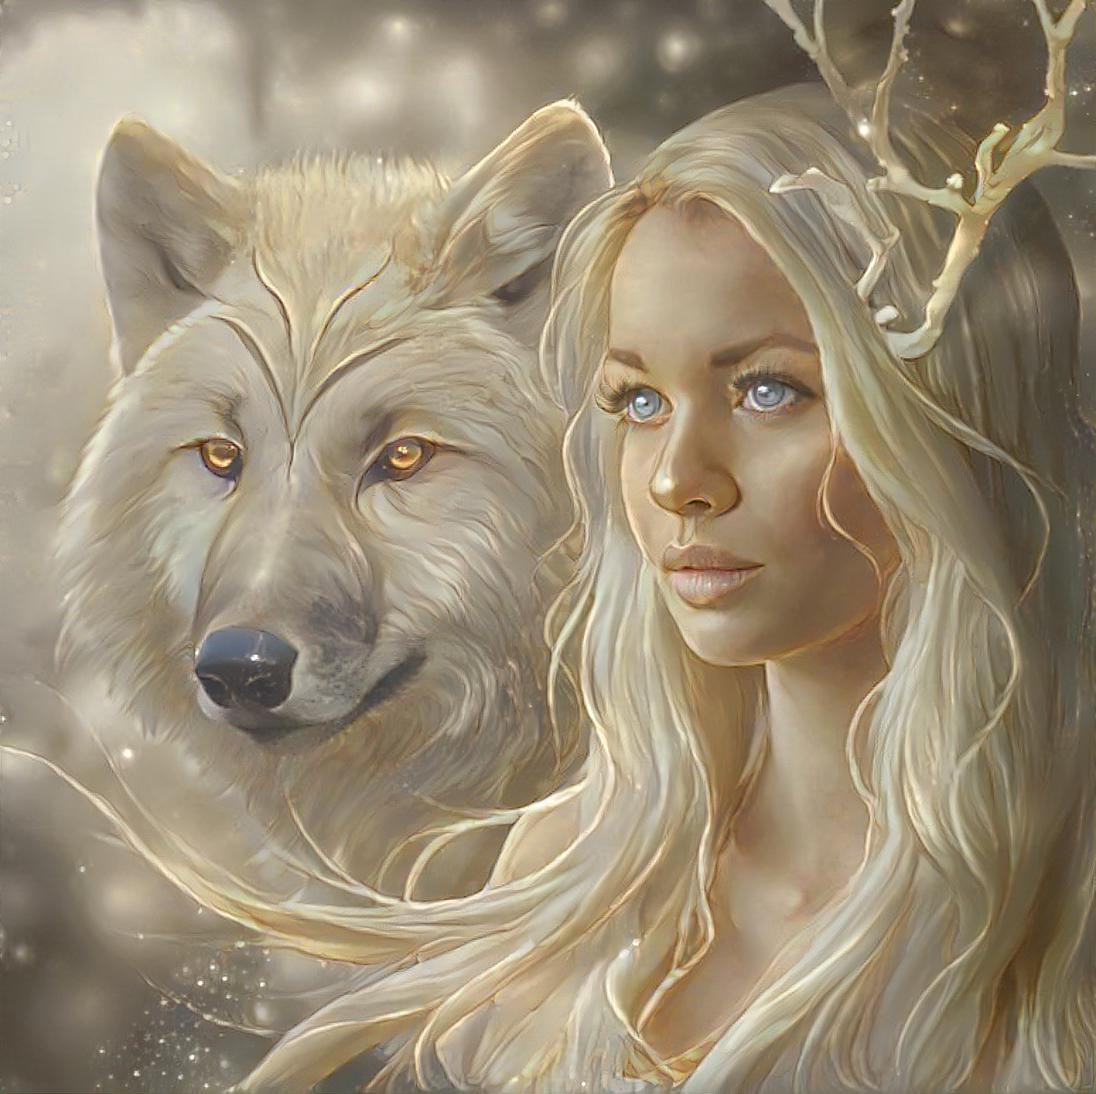 The Girl and the Wolf 